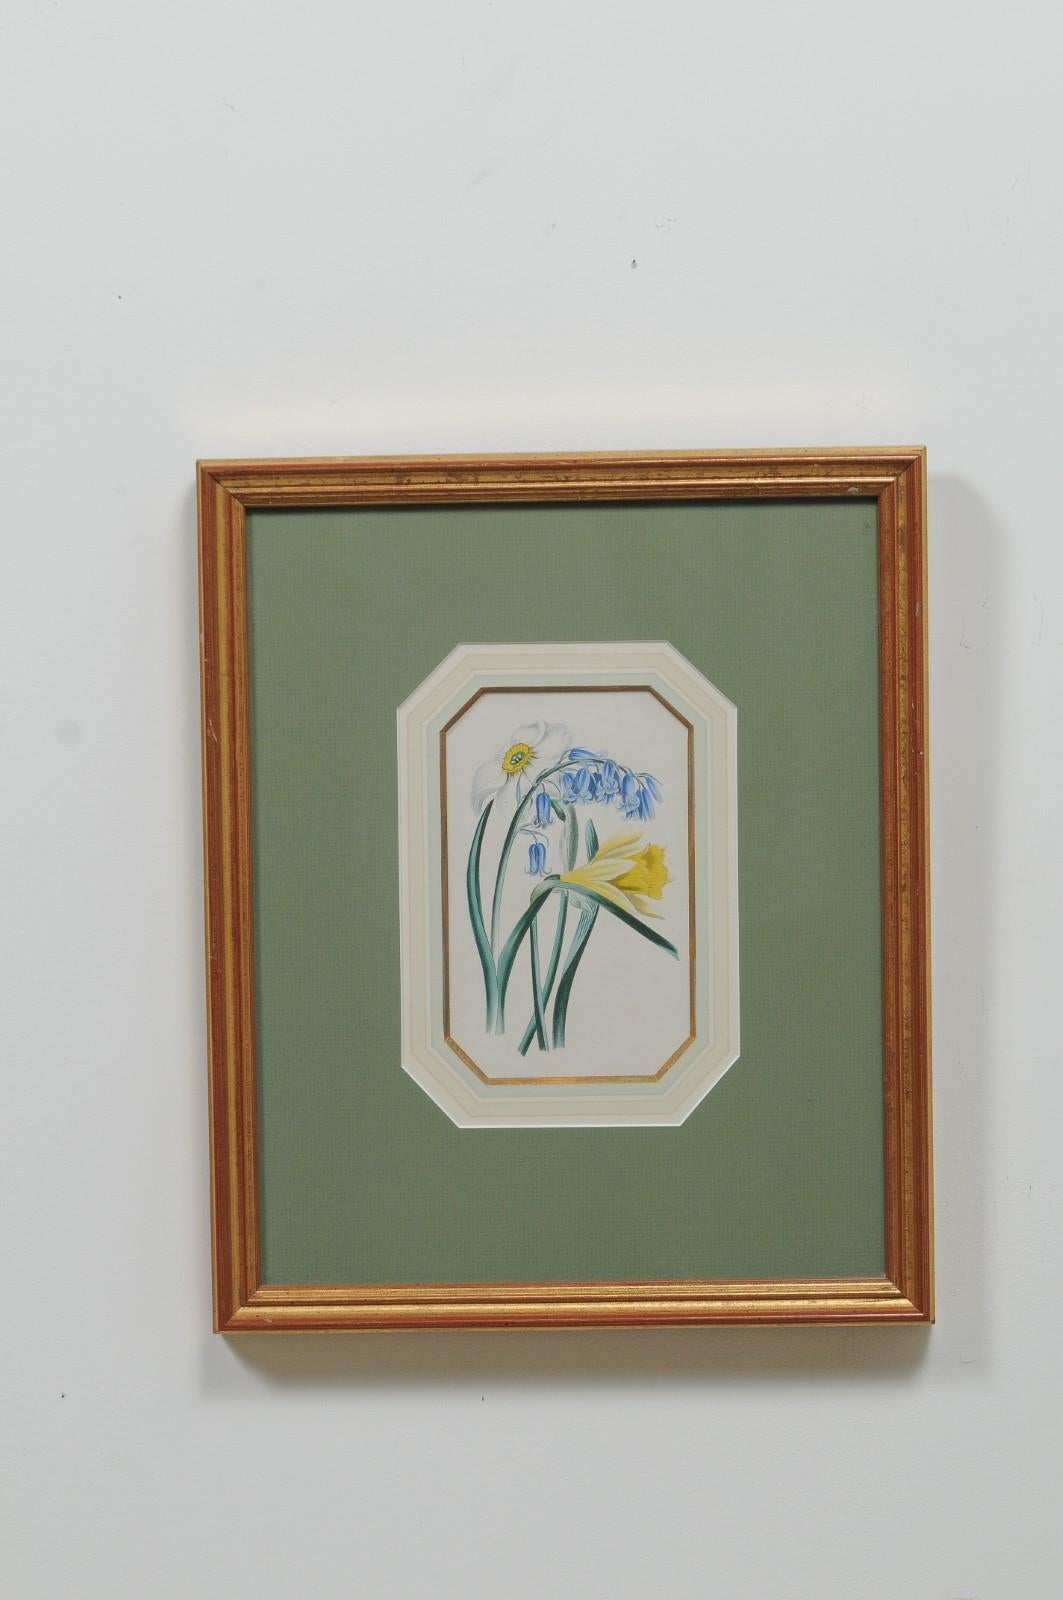 Glass Four English 20th Century Botanical Prints with Yellow, Blue and White Flowers